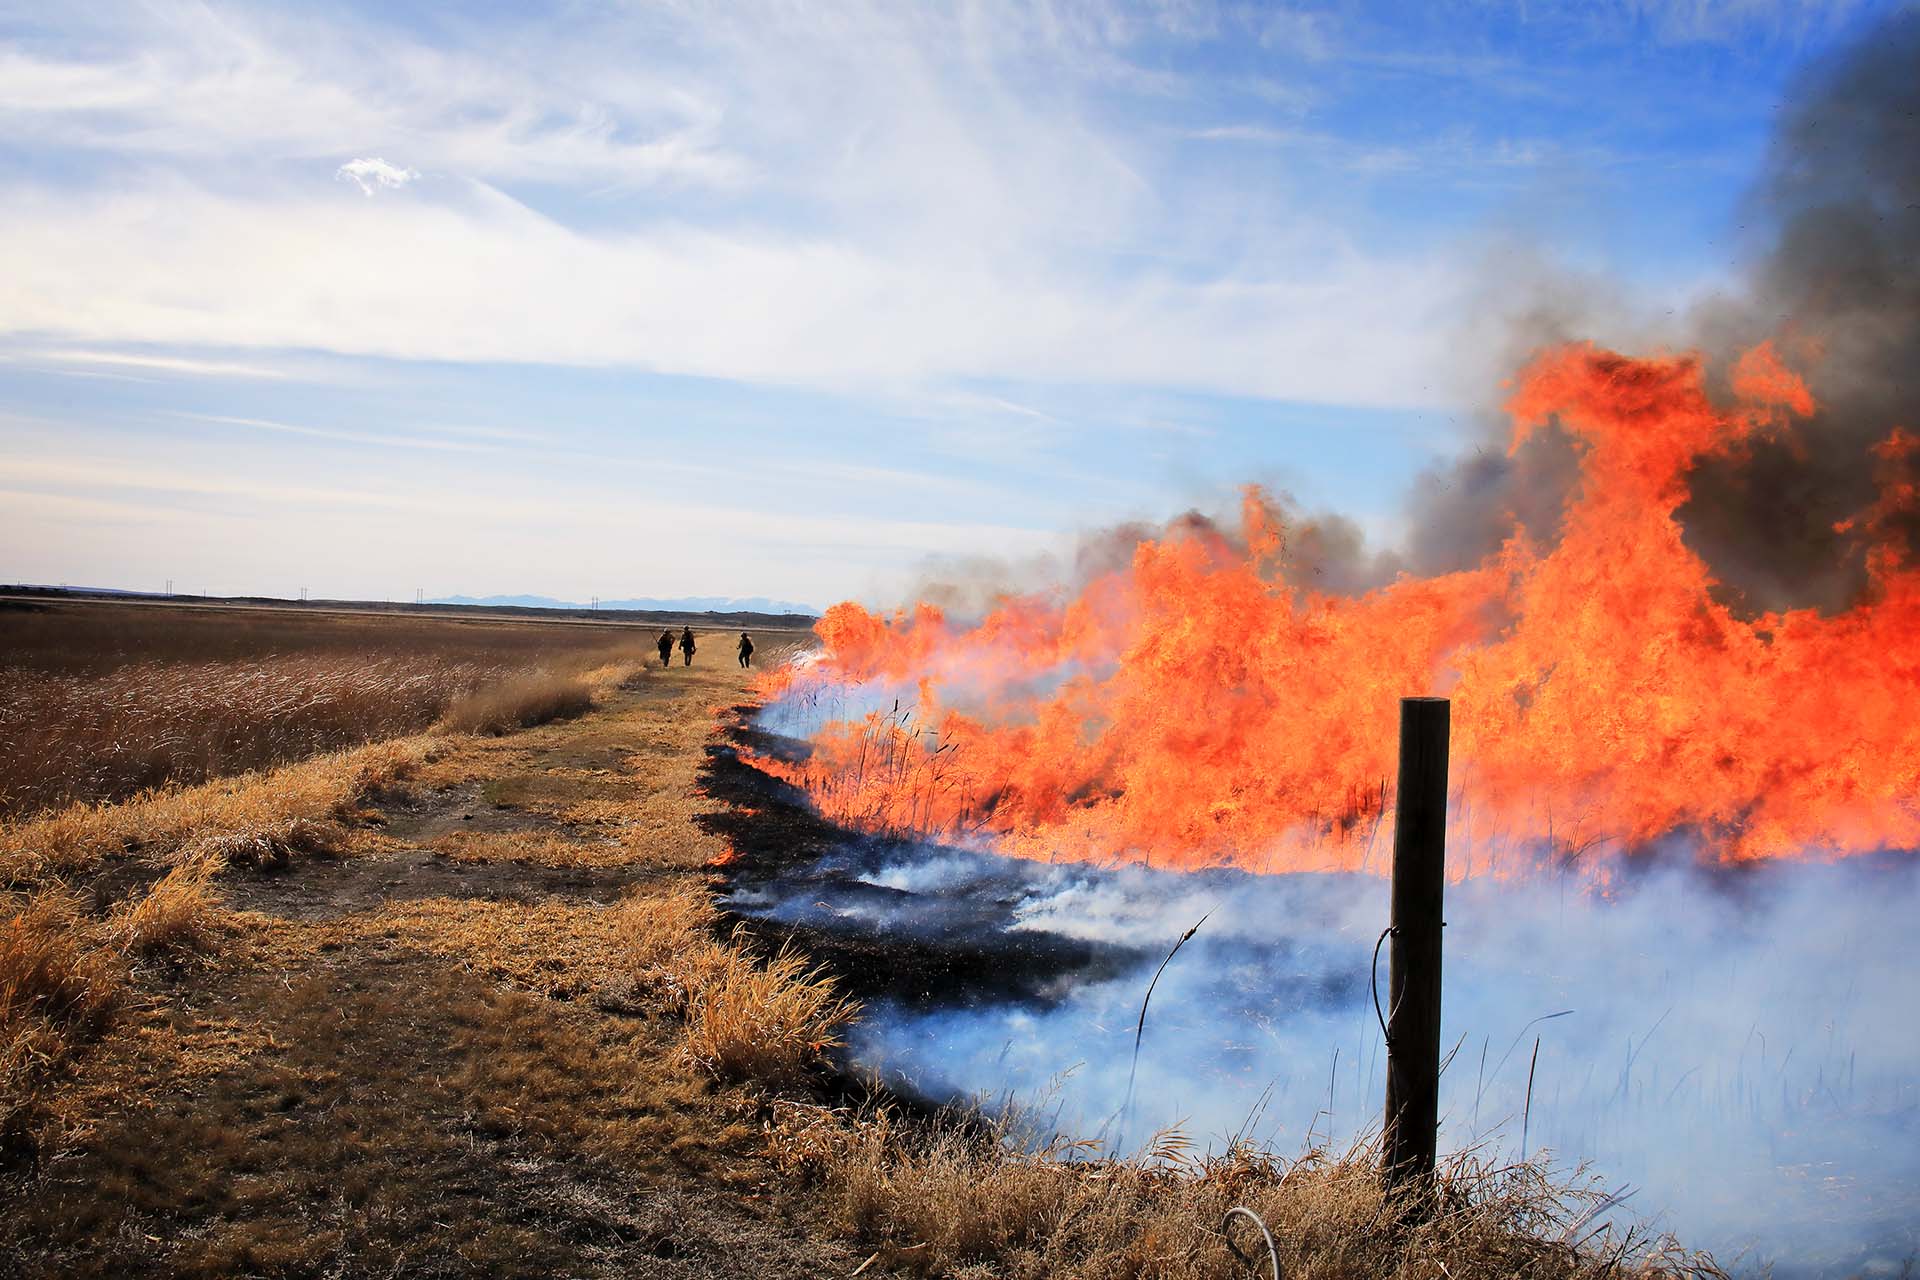 People in the distance; at left, grassland; at right, orange flames